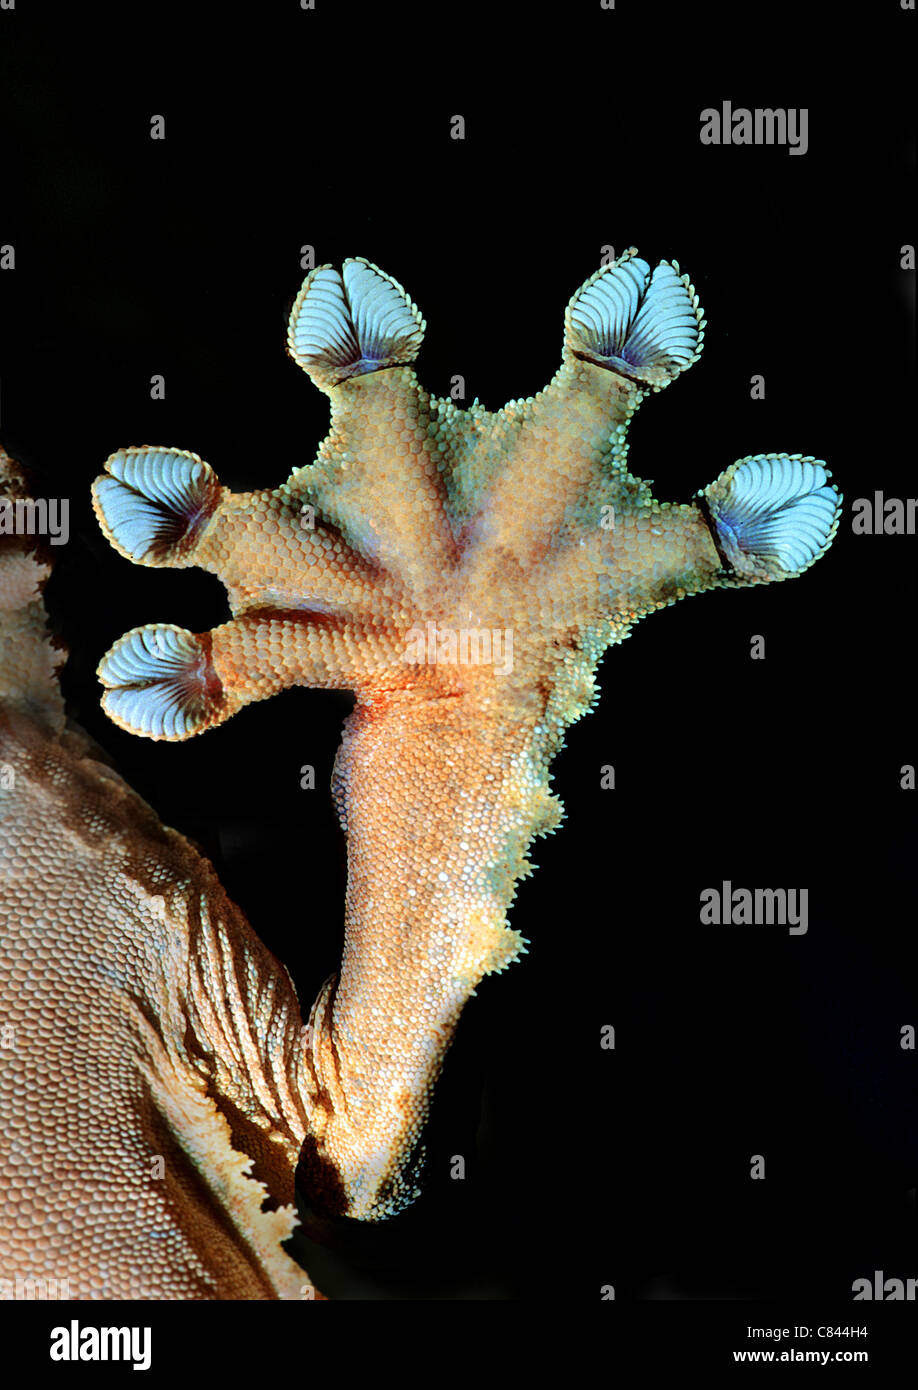 Page 3 - Gecko Foot High Resolution Stock Photography and Images - Alamy